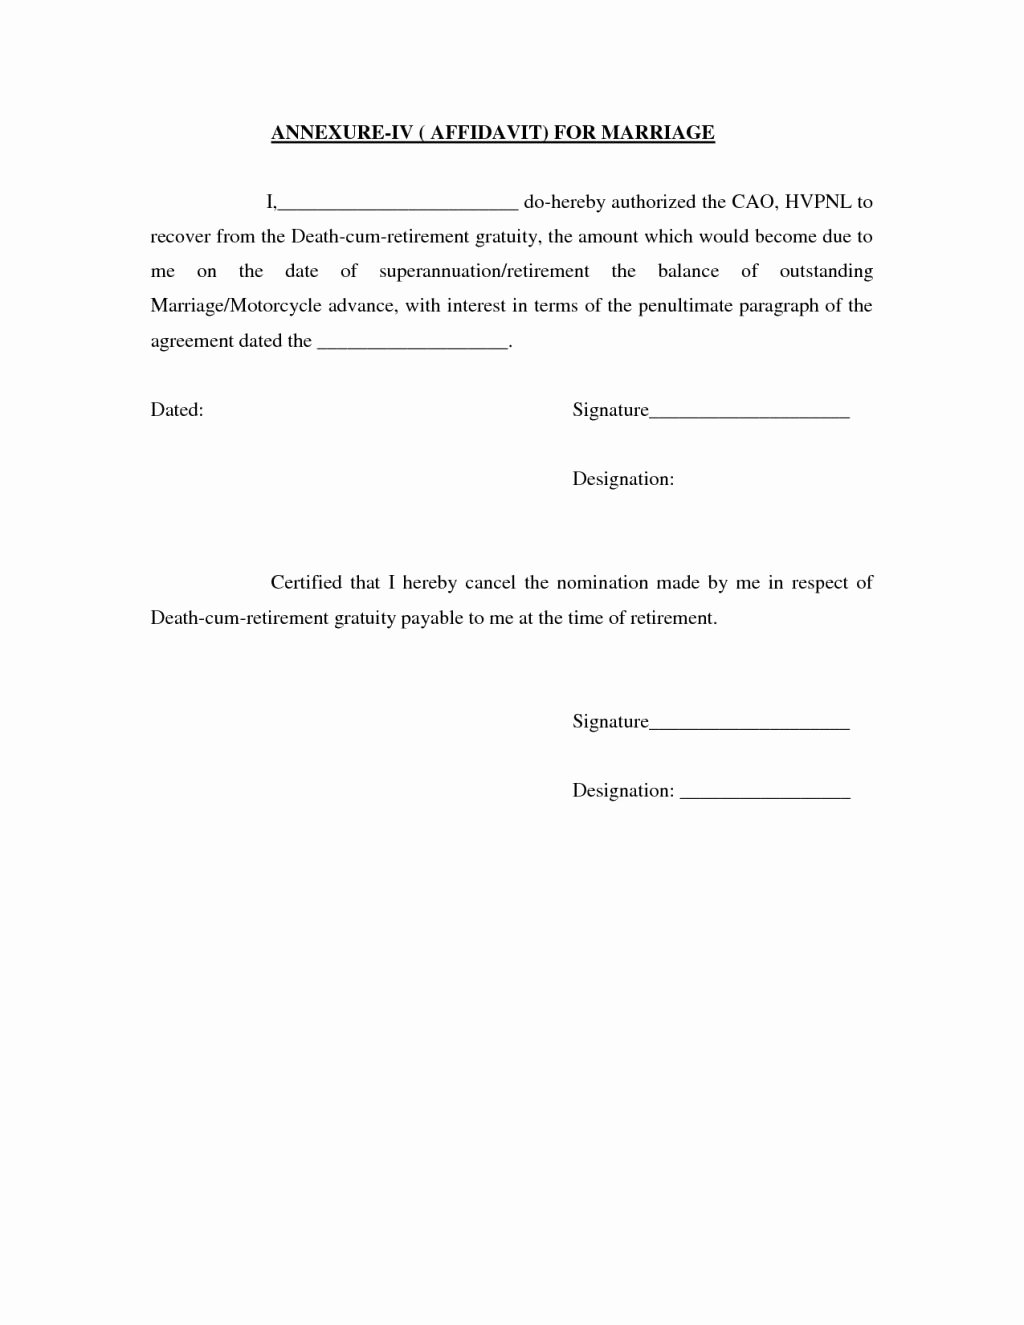 Child Support Agreement Letter Awesome Dandy Sample Child Support Letter – Letter format Writing